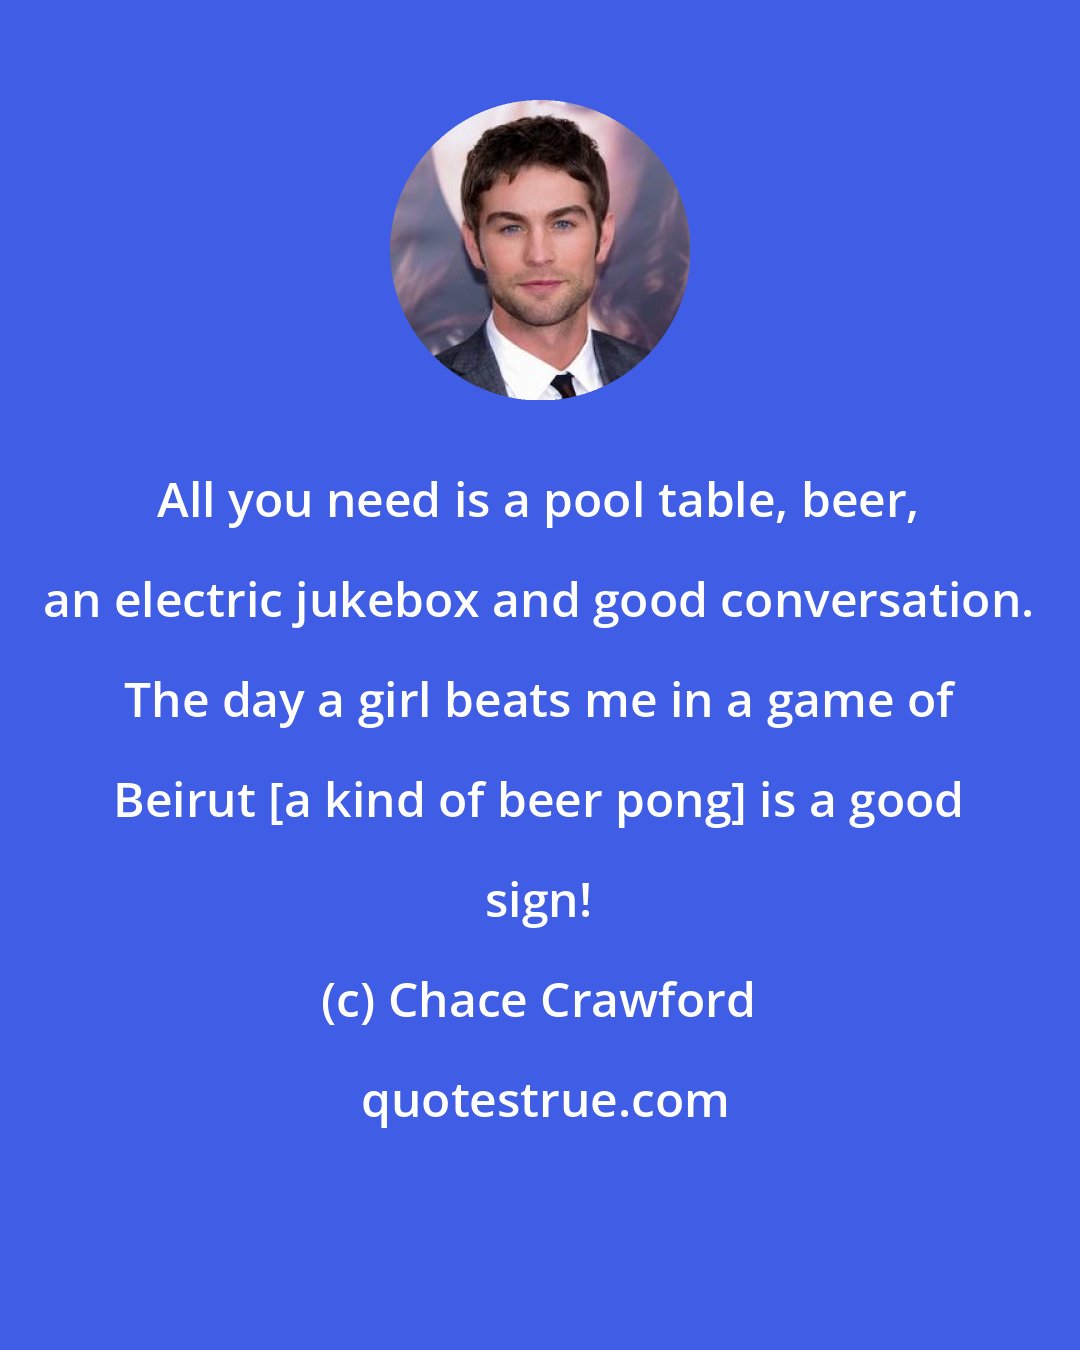 Chace Crawford: All you need is a pool table, beer, an electric jukebox and good conversation. The day a girl beats me in a game of Beirut [a kind of beer pong] is a good sign!